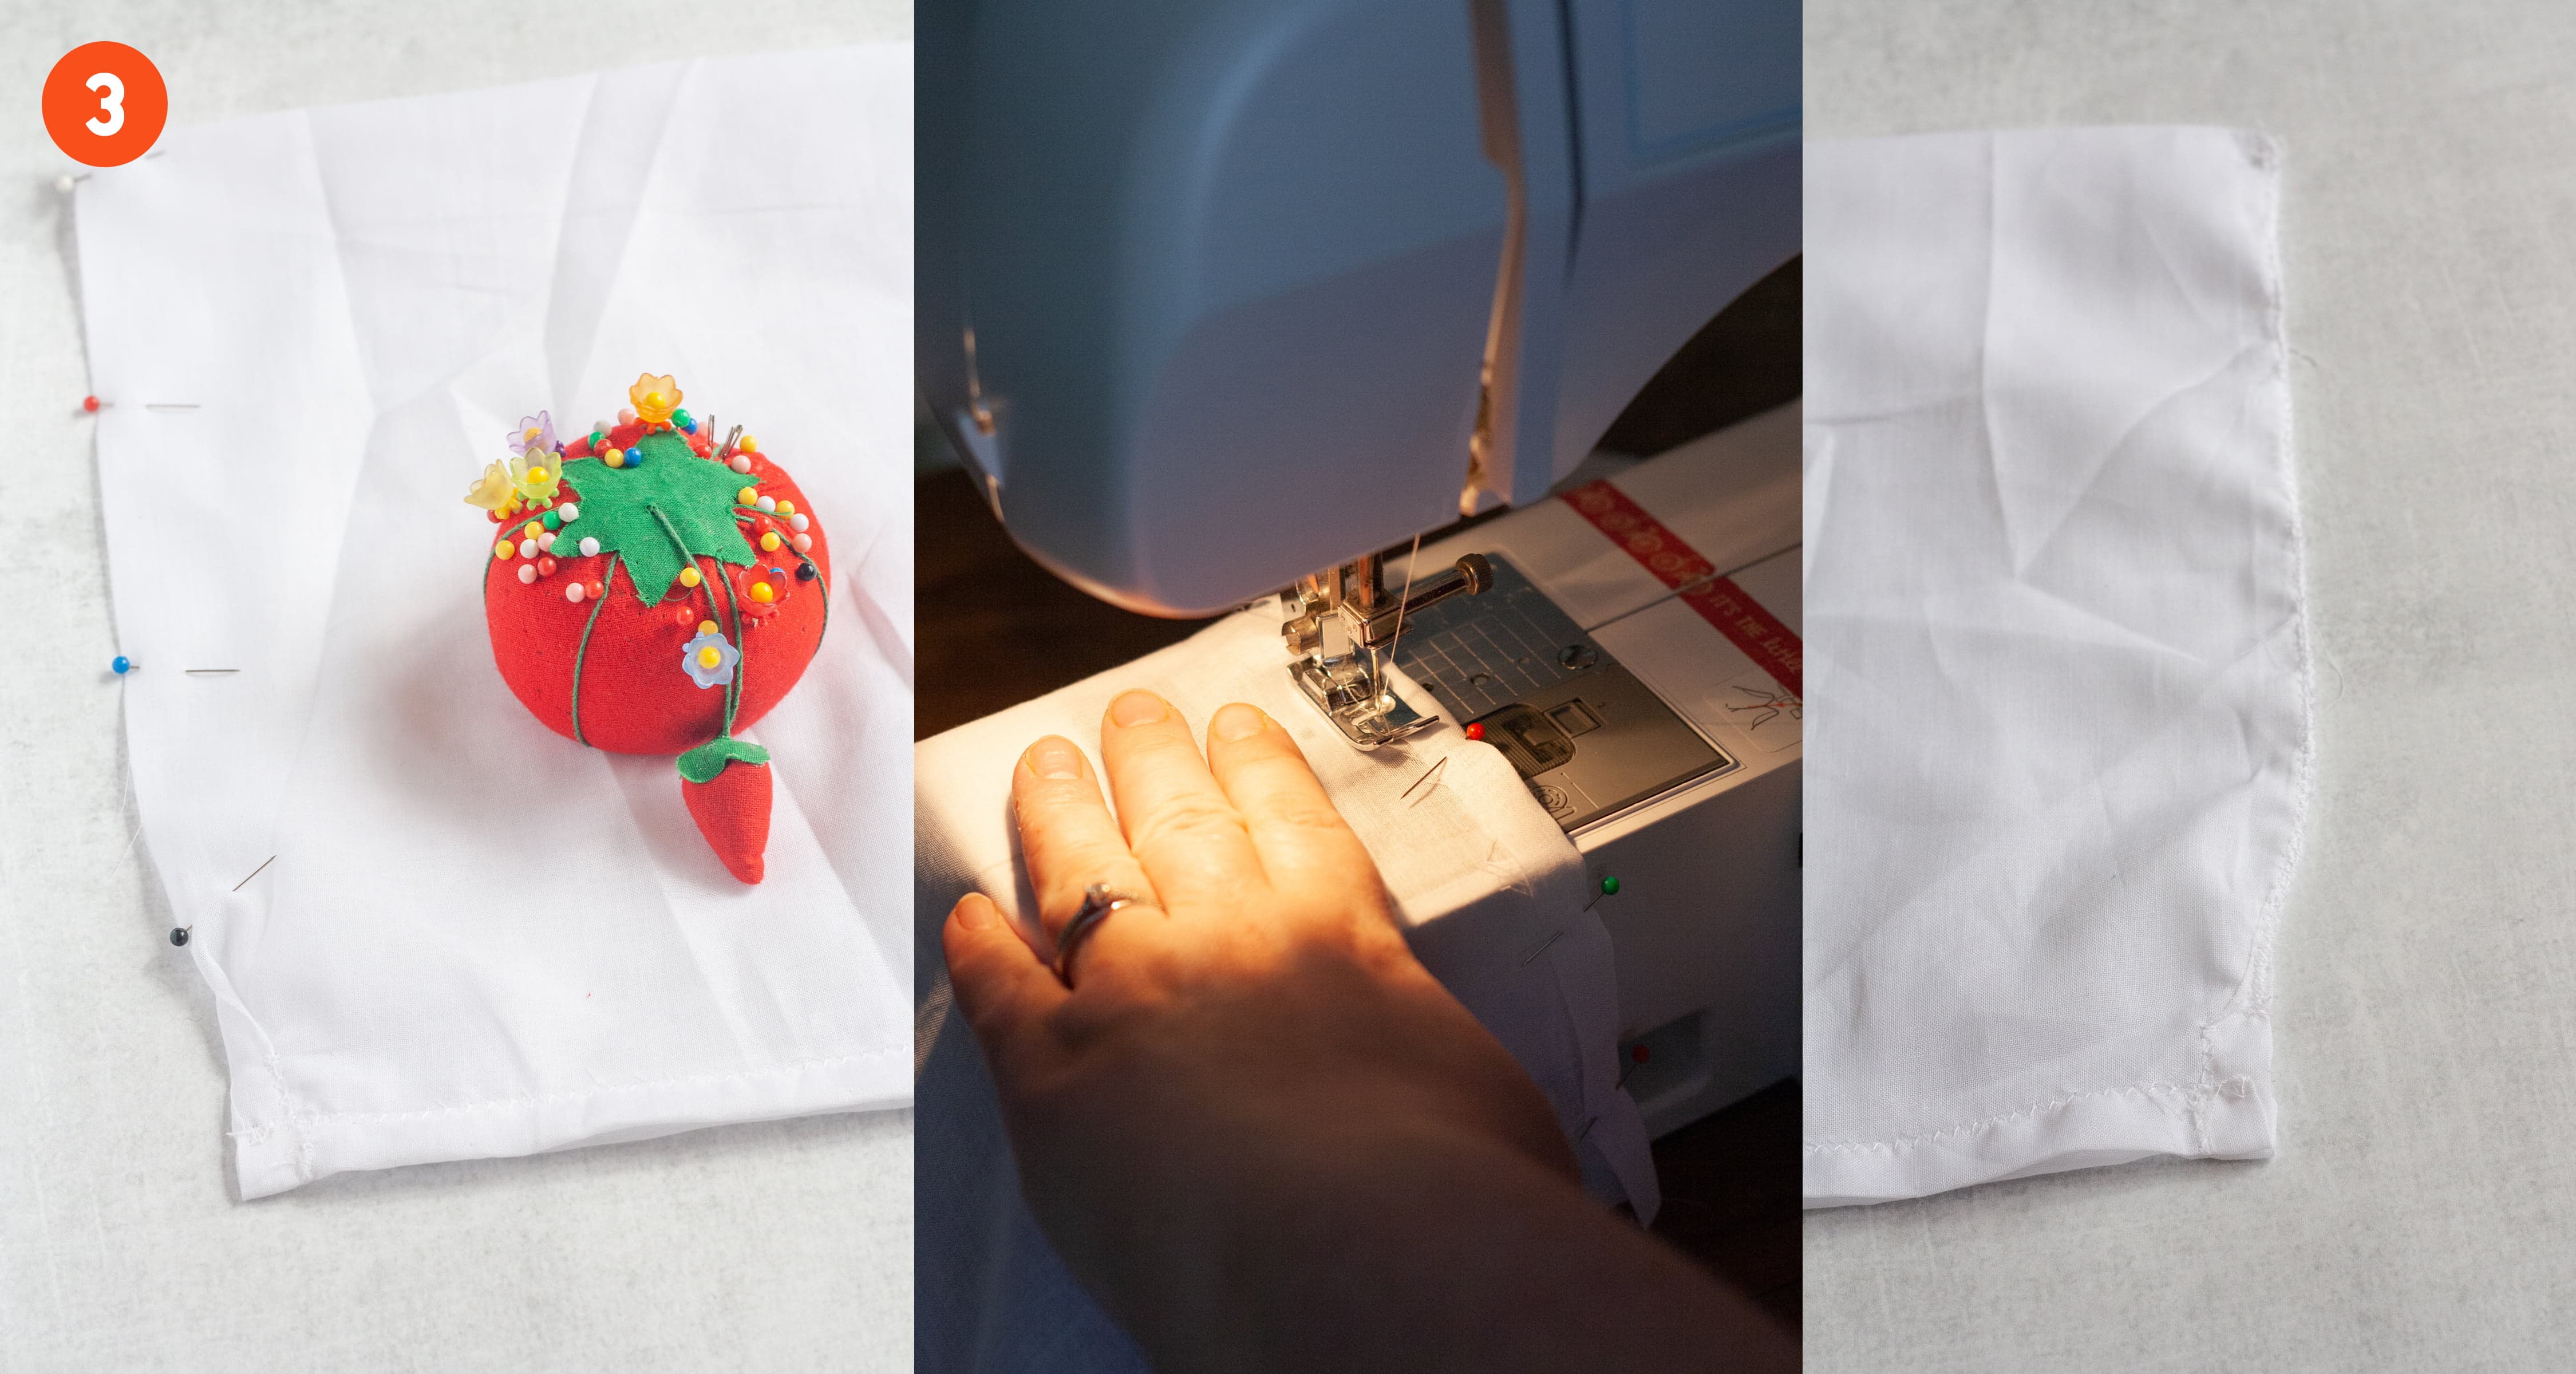 3 images side-by-side showing how to sew a reusable produce bag together. On the left, sides of a bag are pinned together, ready to be sewn. In the middle, the fabric is being fed through a sewing machine. On the third, the sides are sewn. Labeled with 3.